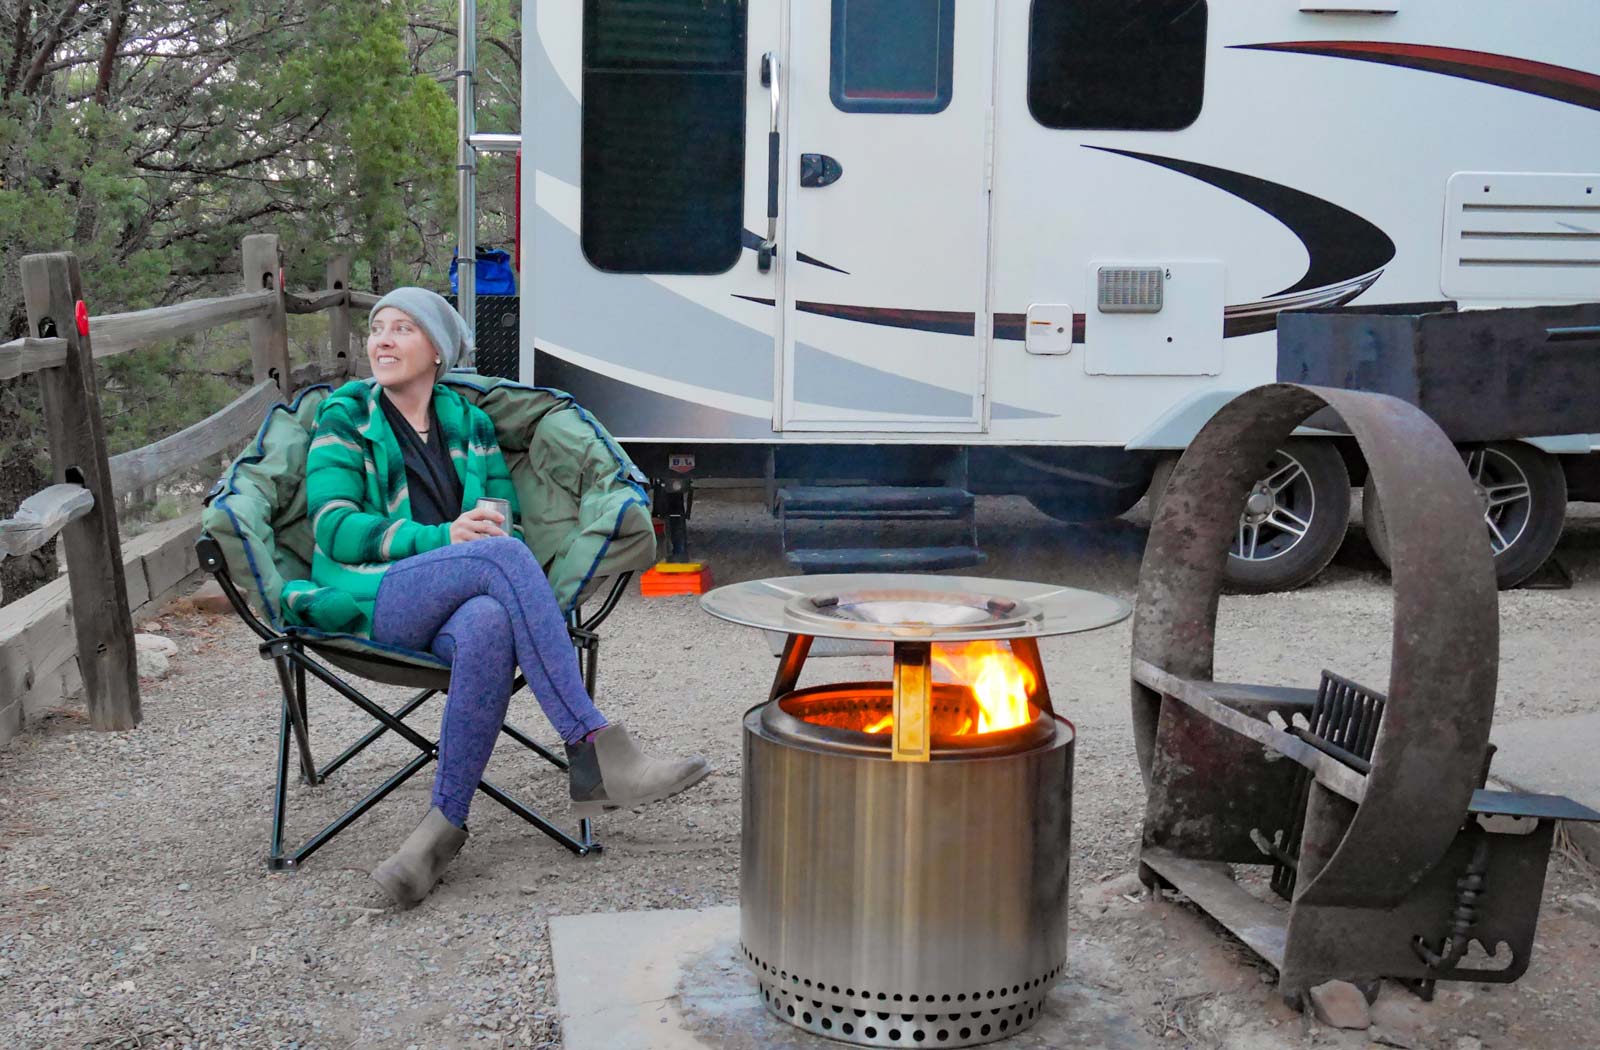 Woman sitting at an RV campsite with solo stove fire pit burning.